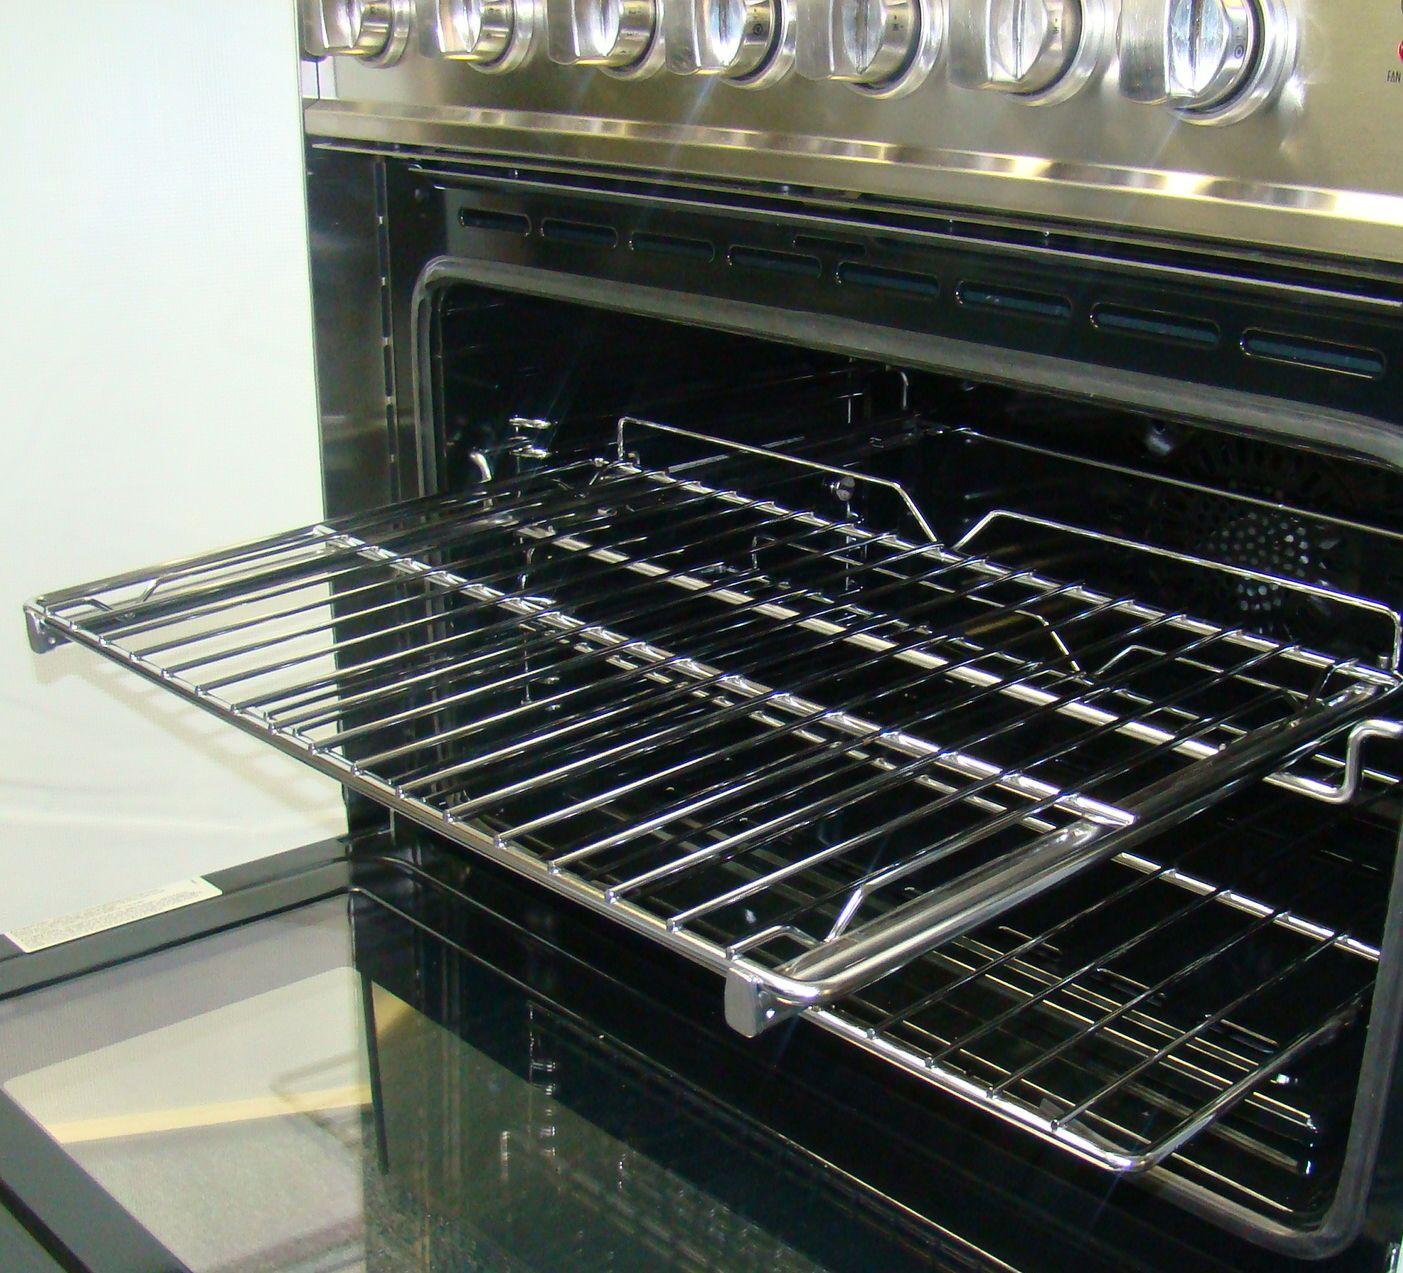 Easy Glide Rolling Rack: Double Oven Range - Large Oven Only (1 Rack)